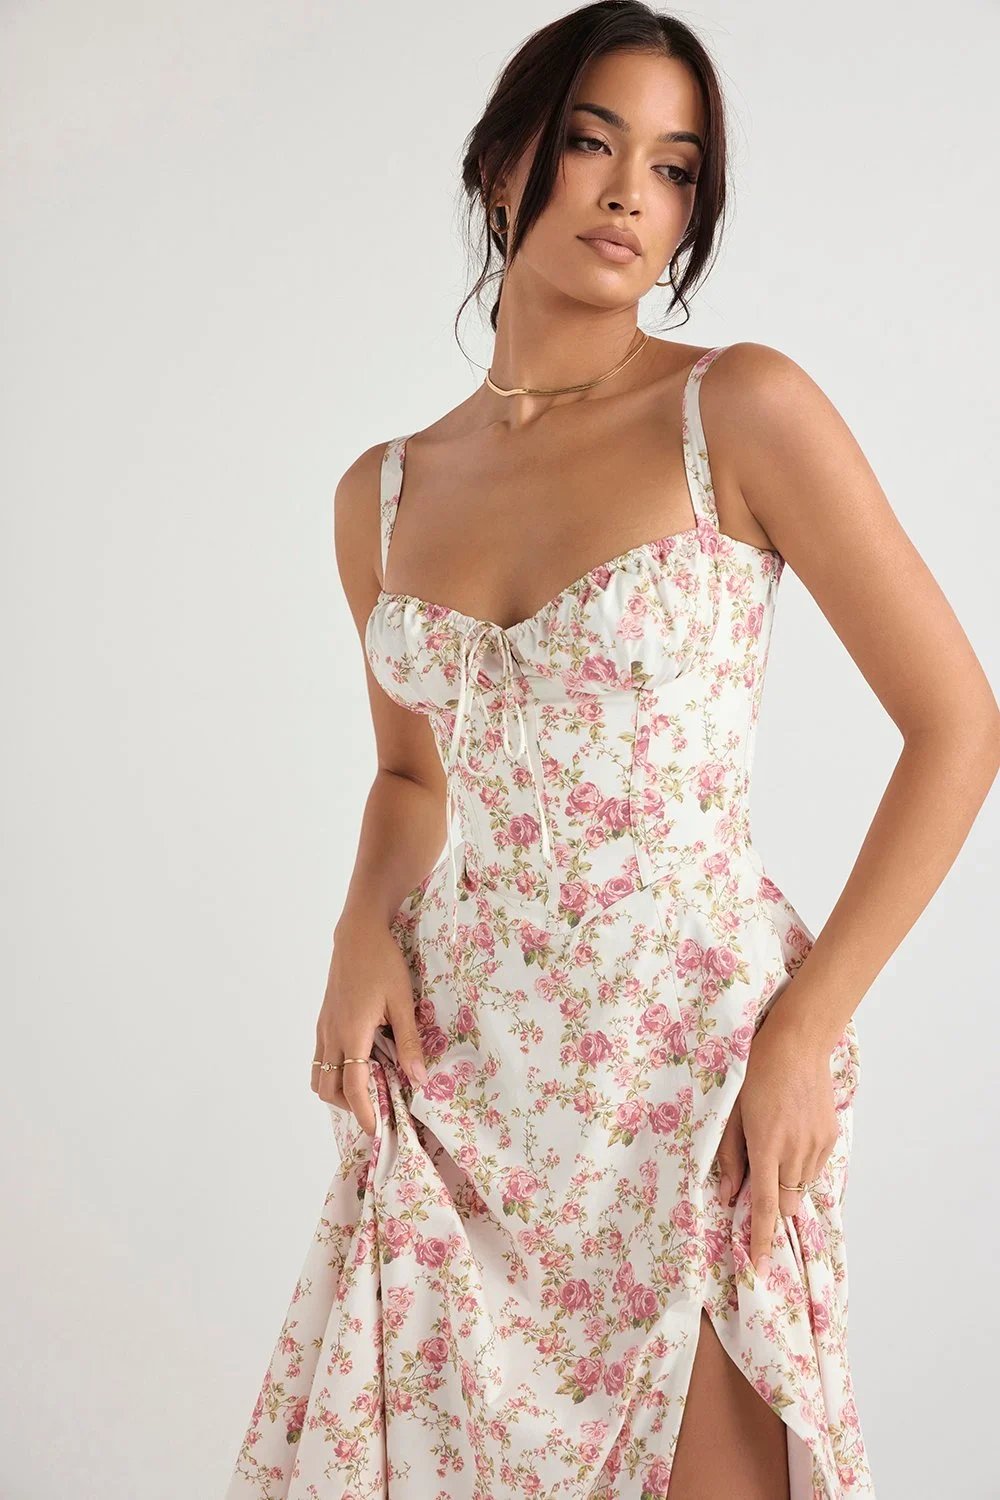 Stay Cool and Comfortable with Our Print Bustier Sundress - 40% Off!ss